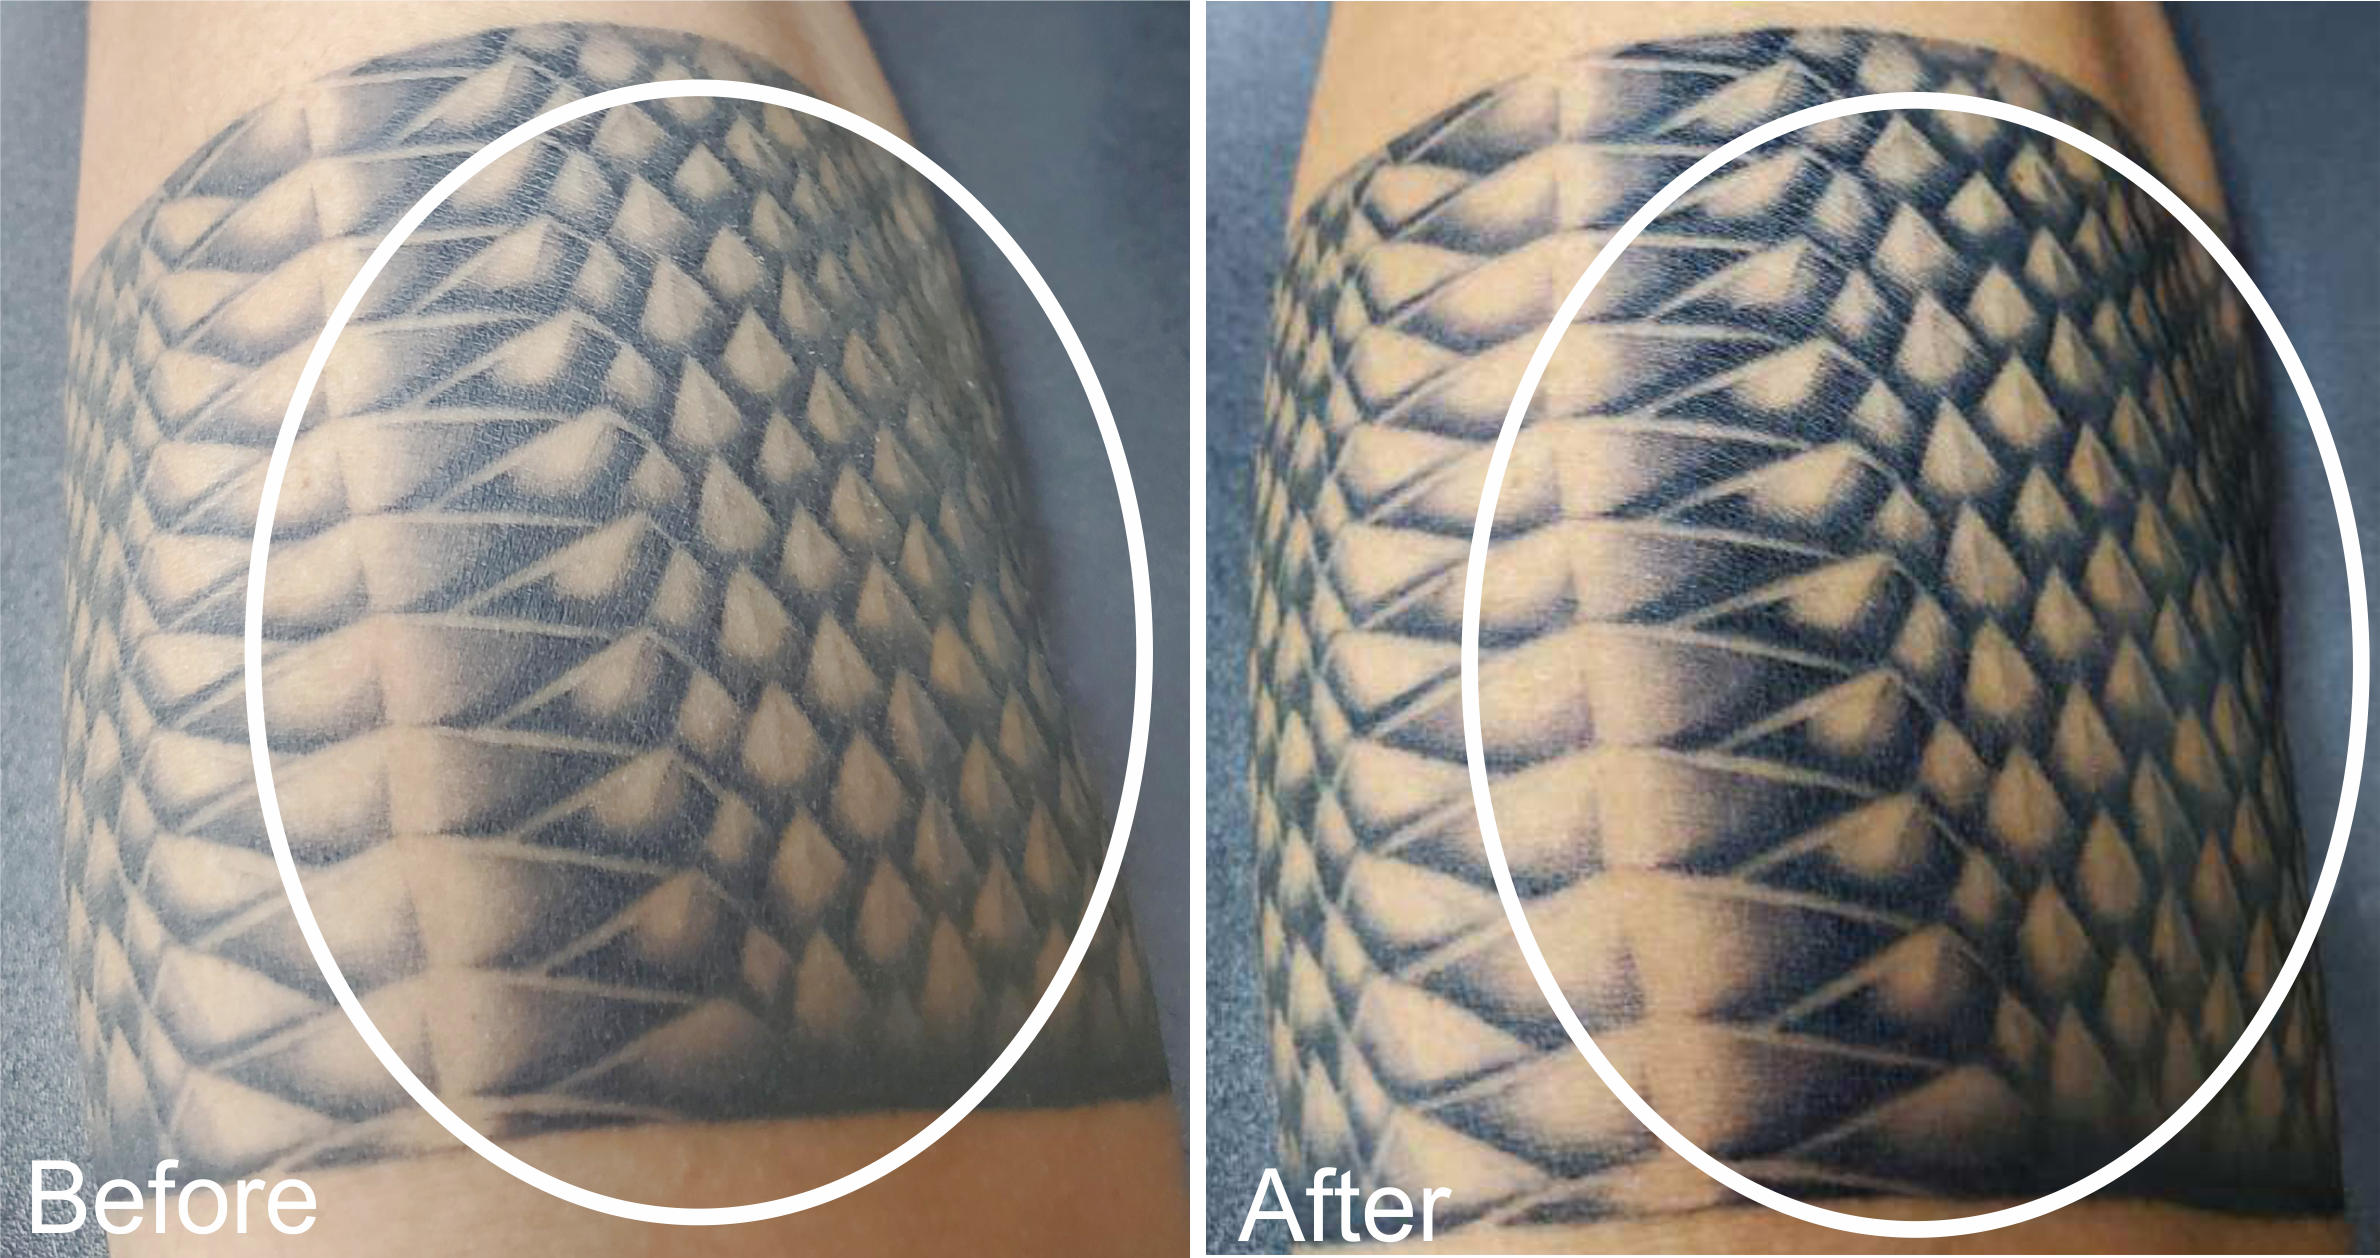 Joseph Tattoo Before and After